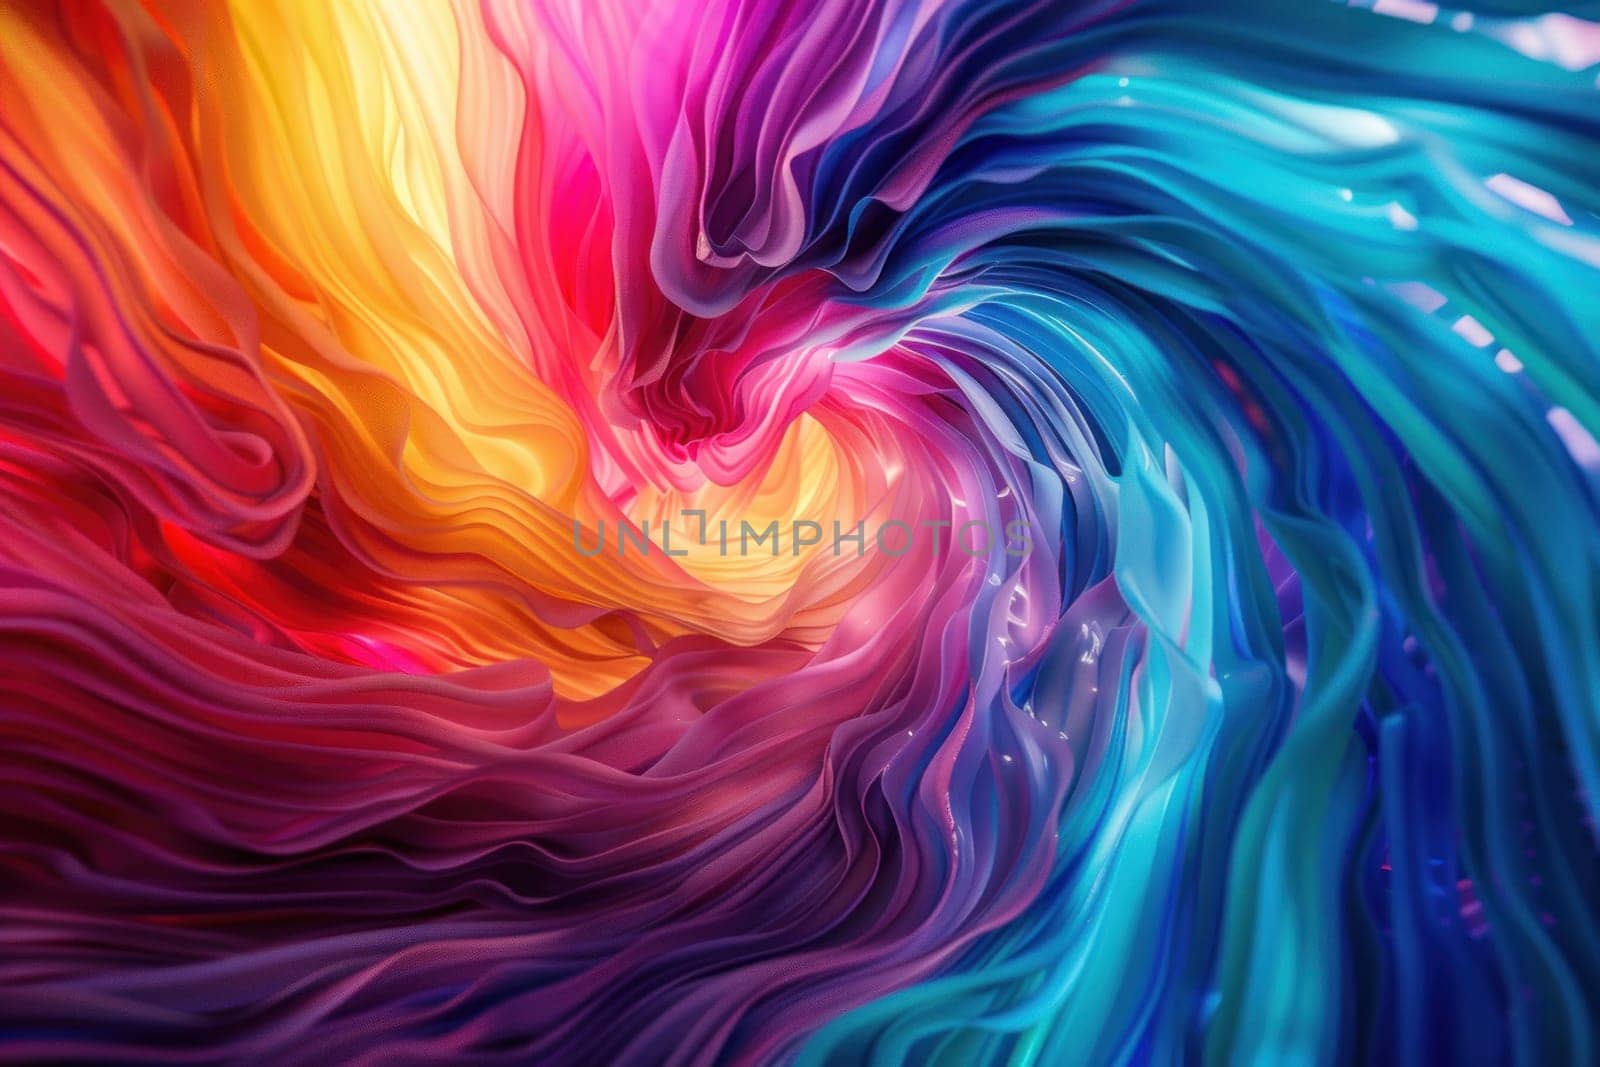 A colorful swirl of fabric with a rainbow of colors. The colors are vibrant and the fabric is flowing in a spiral. Concept of movement and energy, as if the fabric is dancing or swirling in the air